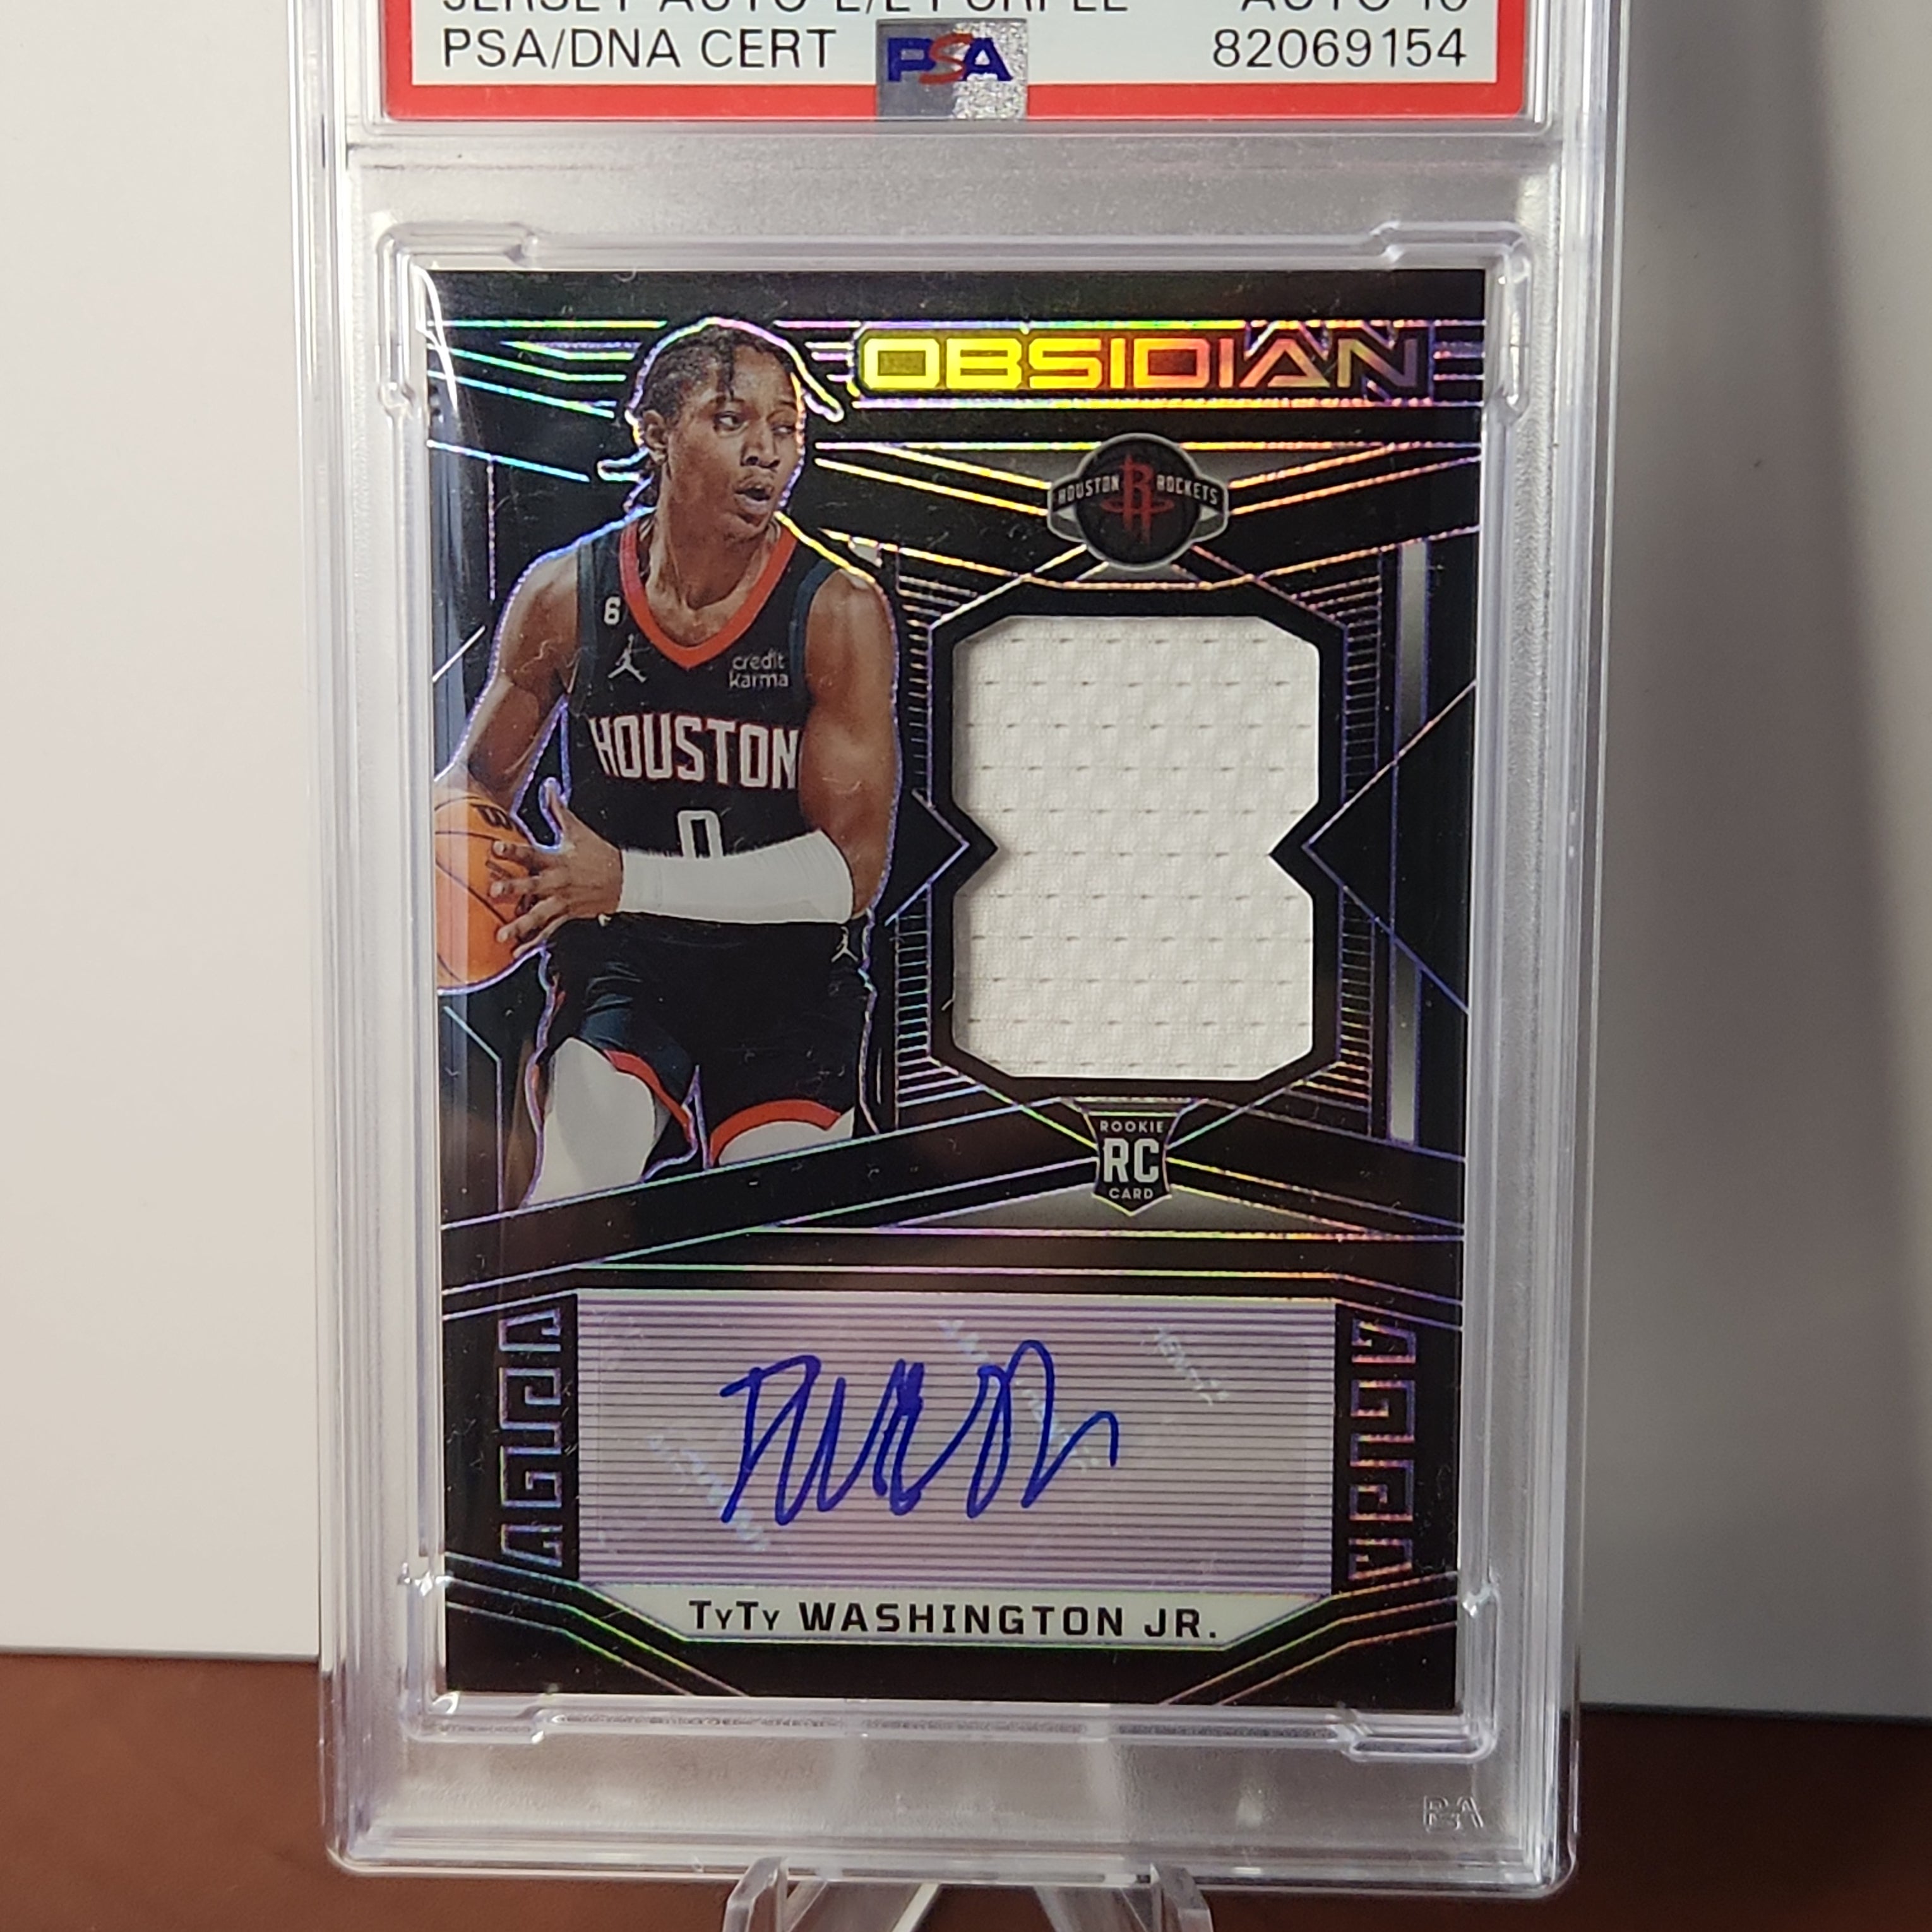 TyTy Washington Jr 2022/23 Obsidian Jersey Auto-E/E Purple **35/75**  **PSA MINT 9** POP 1 - Premium  from 1of1 Collectables - Just $249! Shop now at 1of1 Collectables